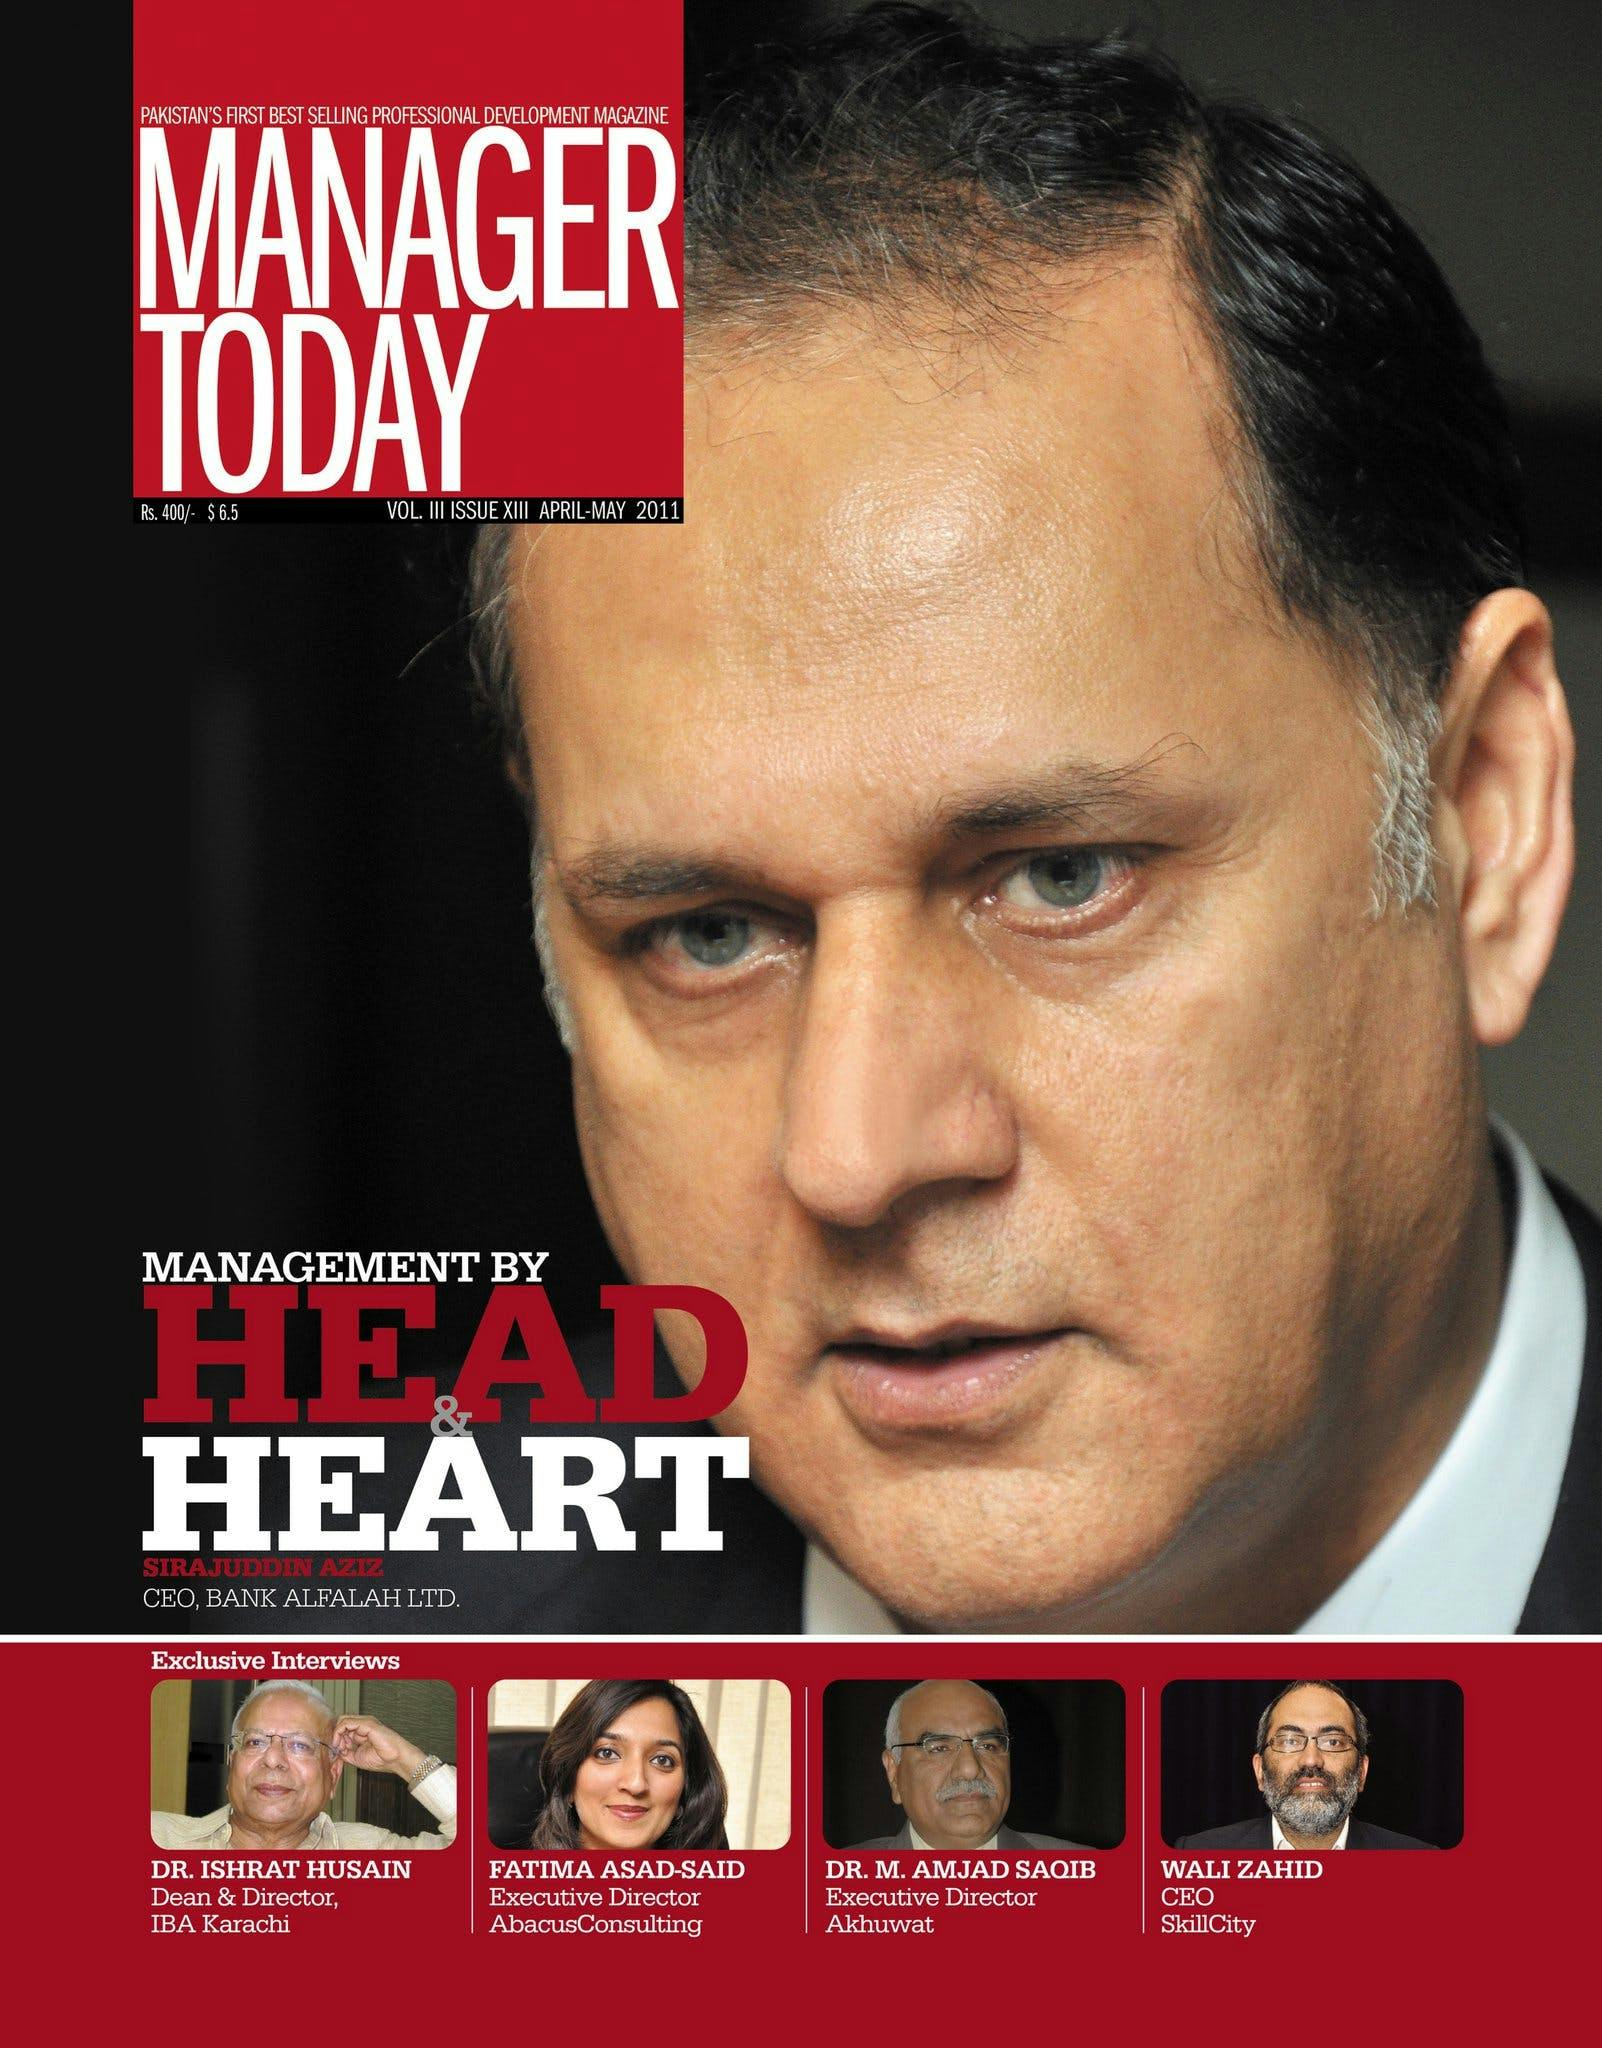 SkillCity CEO Wali Zahid’s cover interview in Manager Today magazine, Lahore, Pakistan